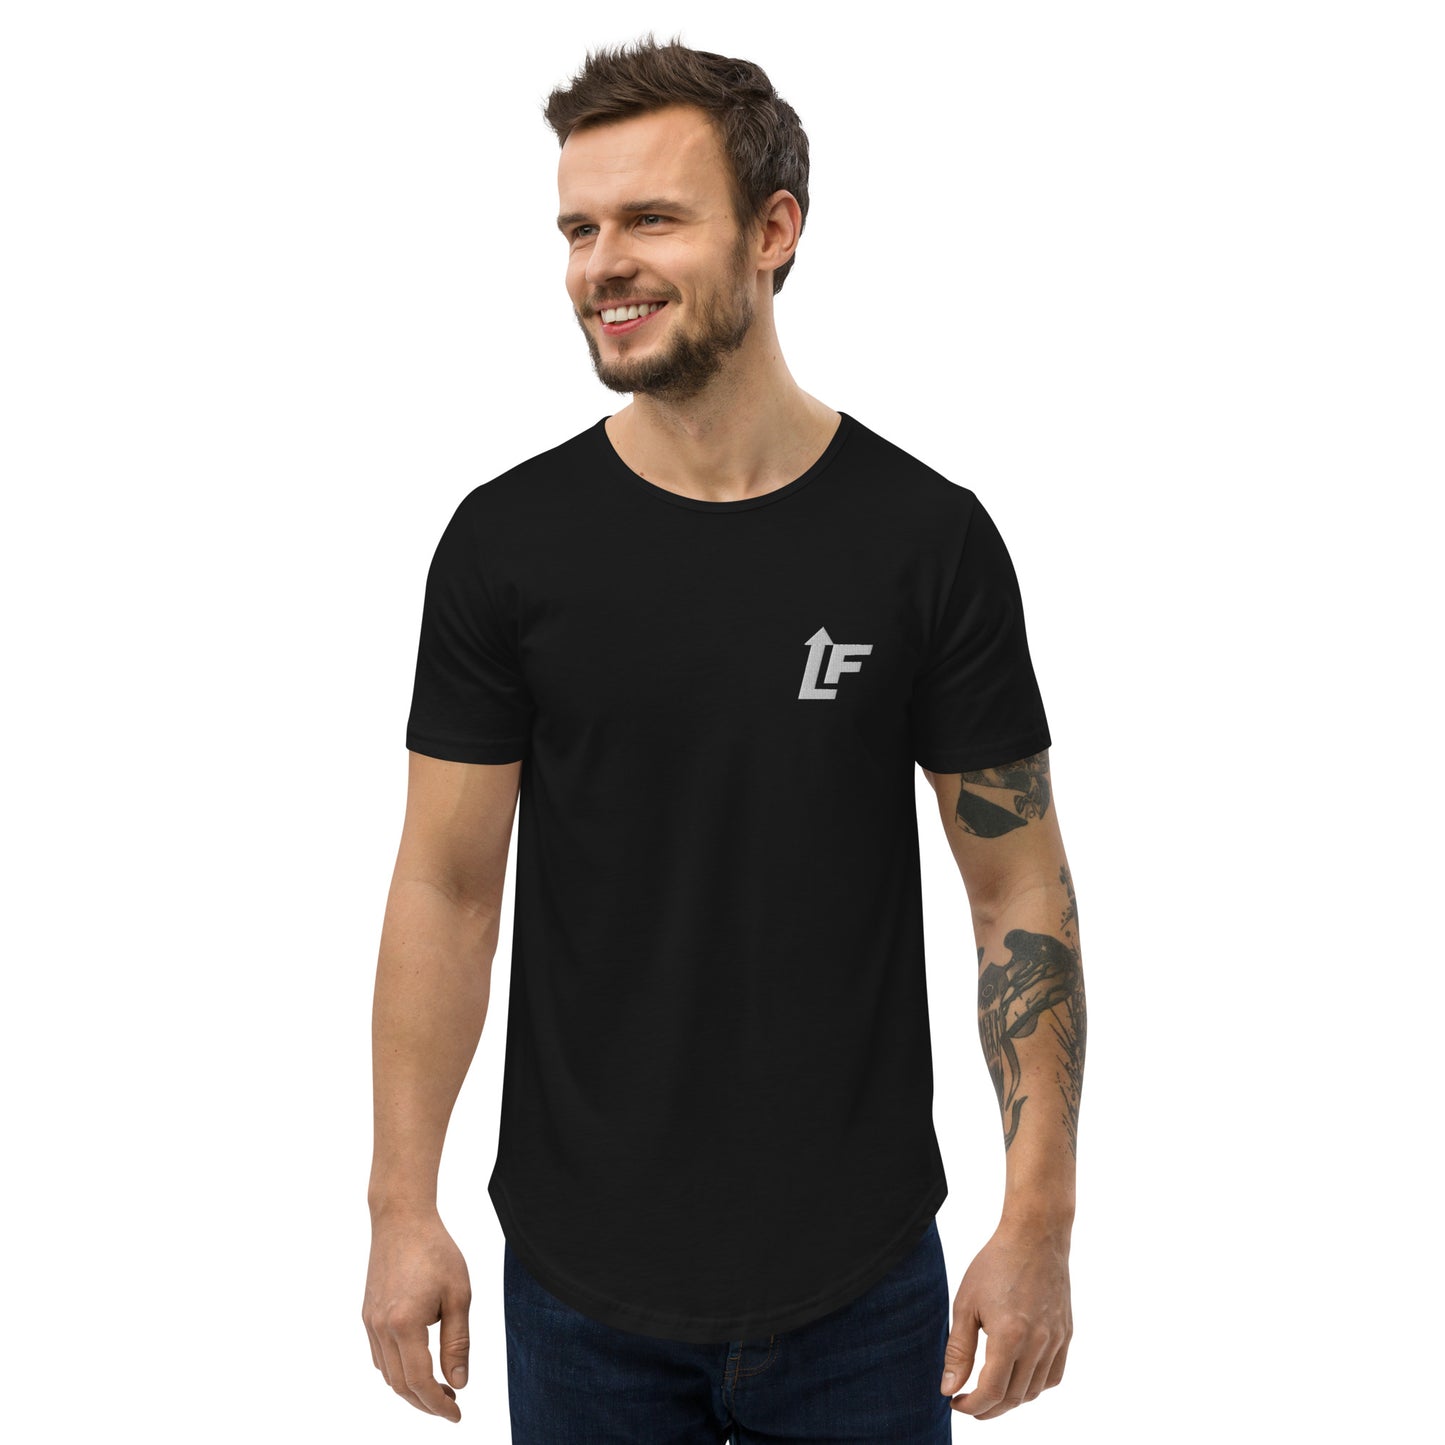 MEN'S CURVED TEE